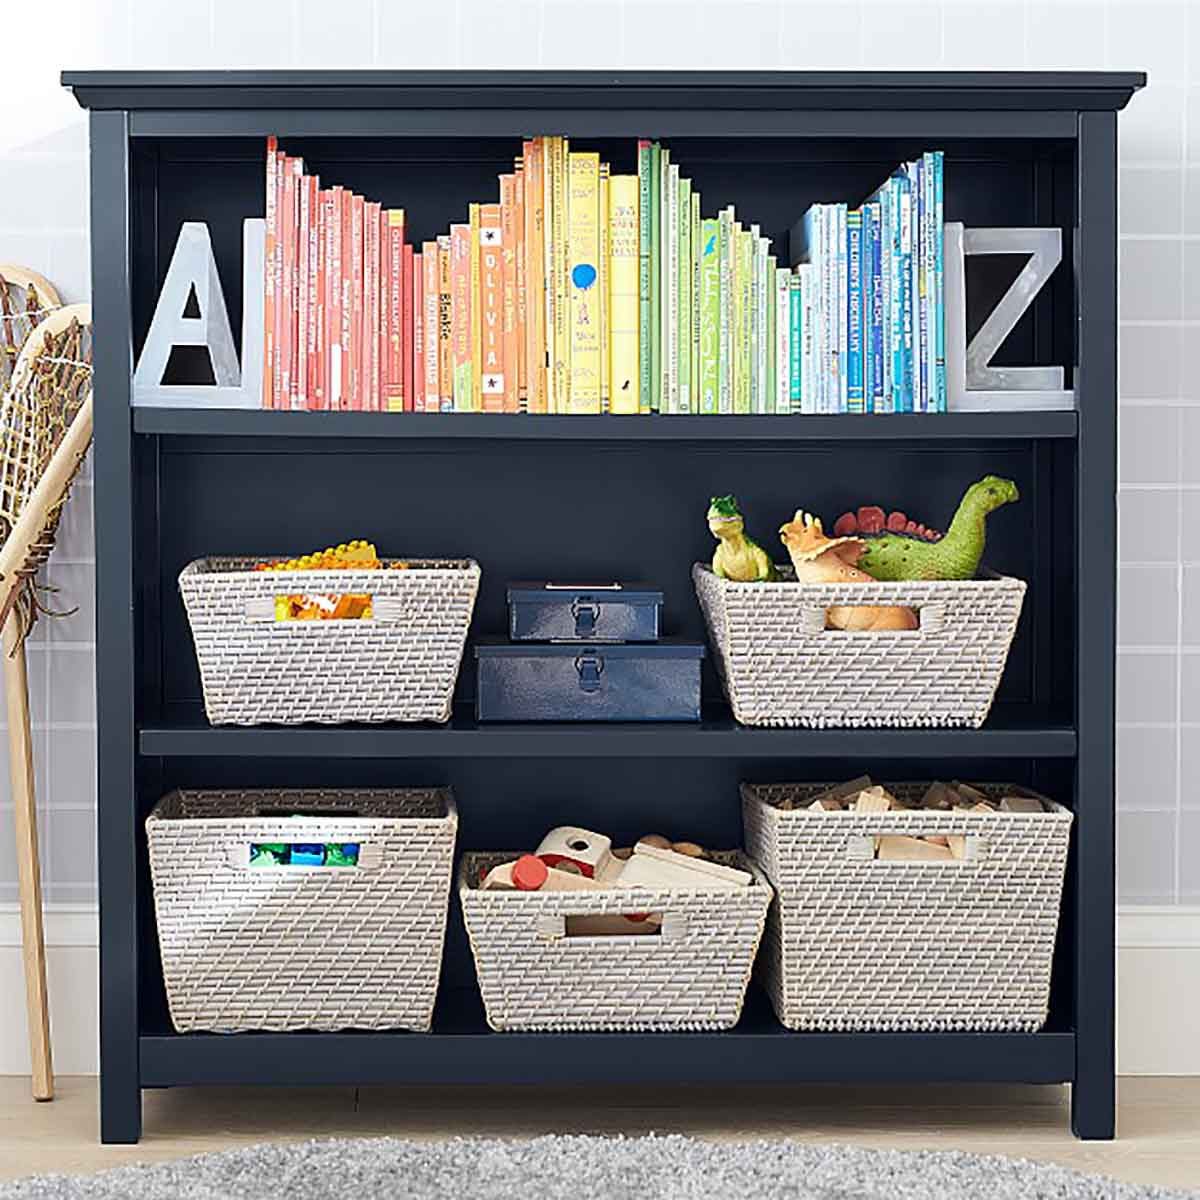 15 Kidsâ€™ Bookcases That Are Both Stylish and Functional